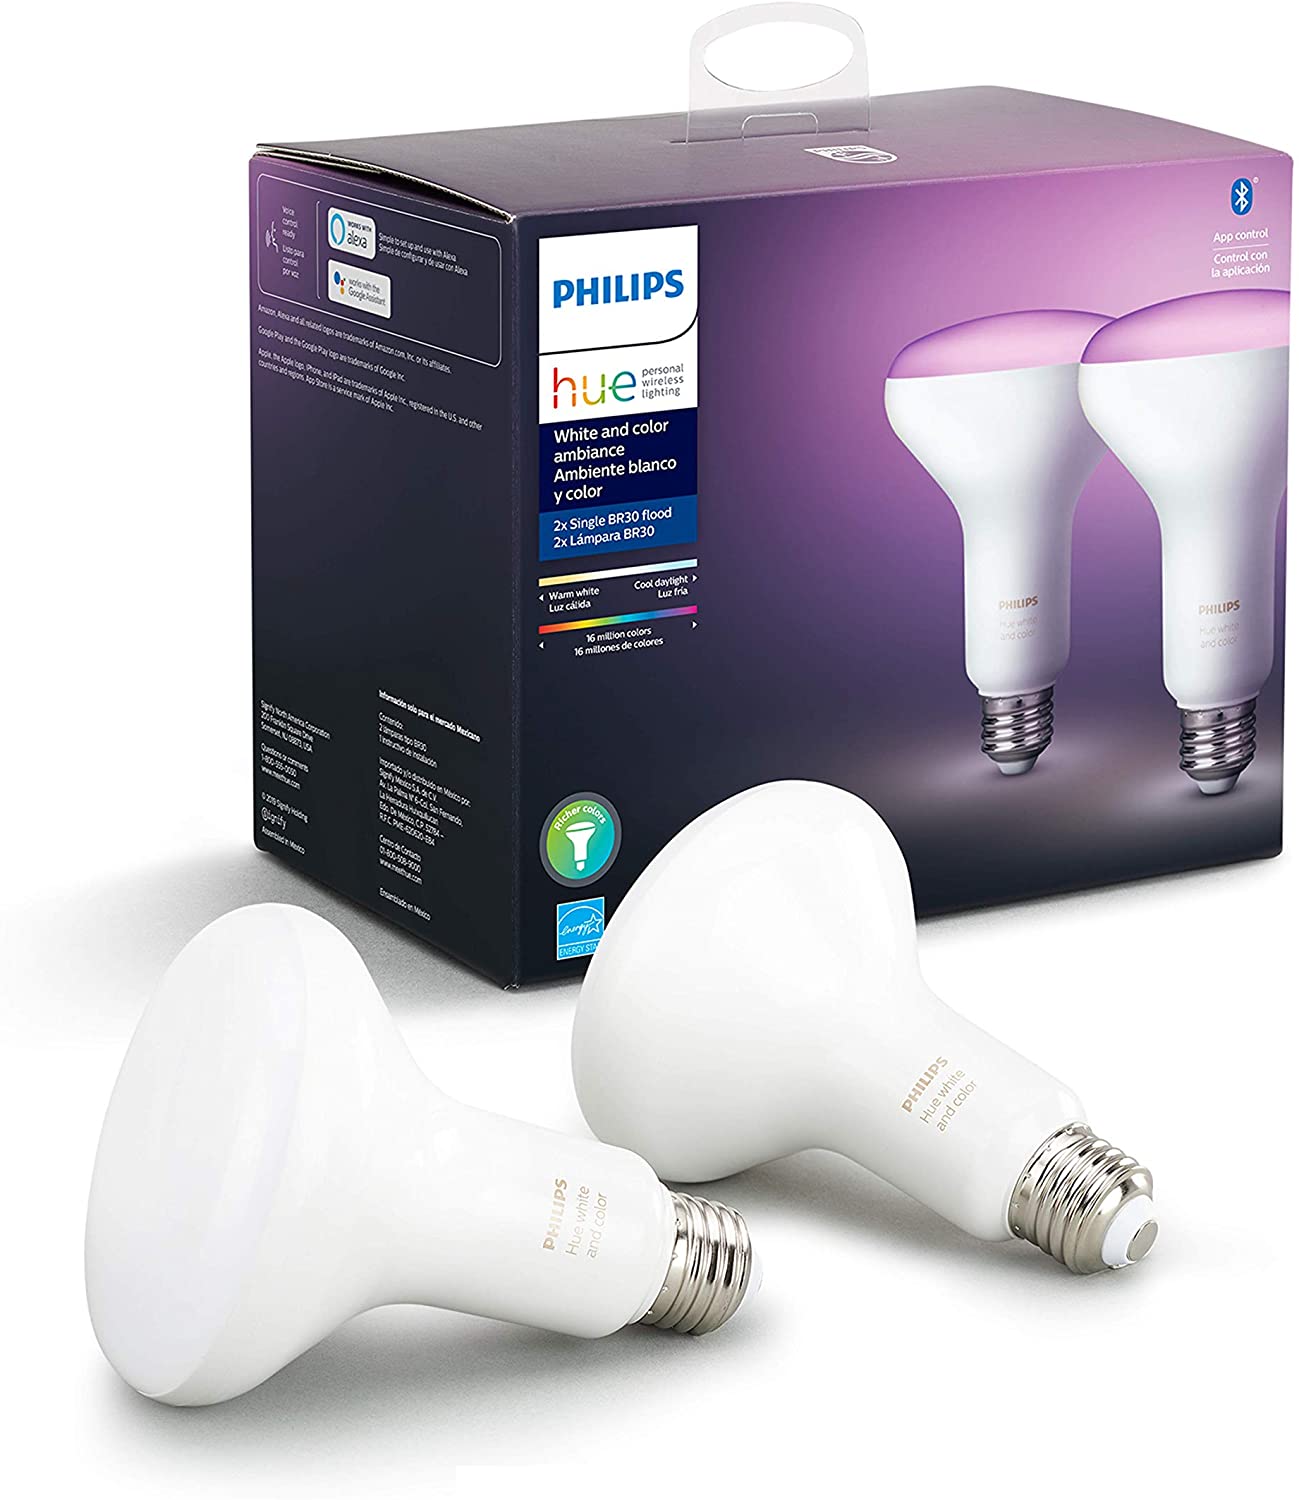 Philips Hue White Color Ambiance Bulbs